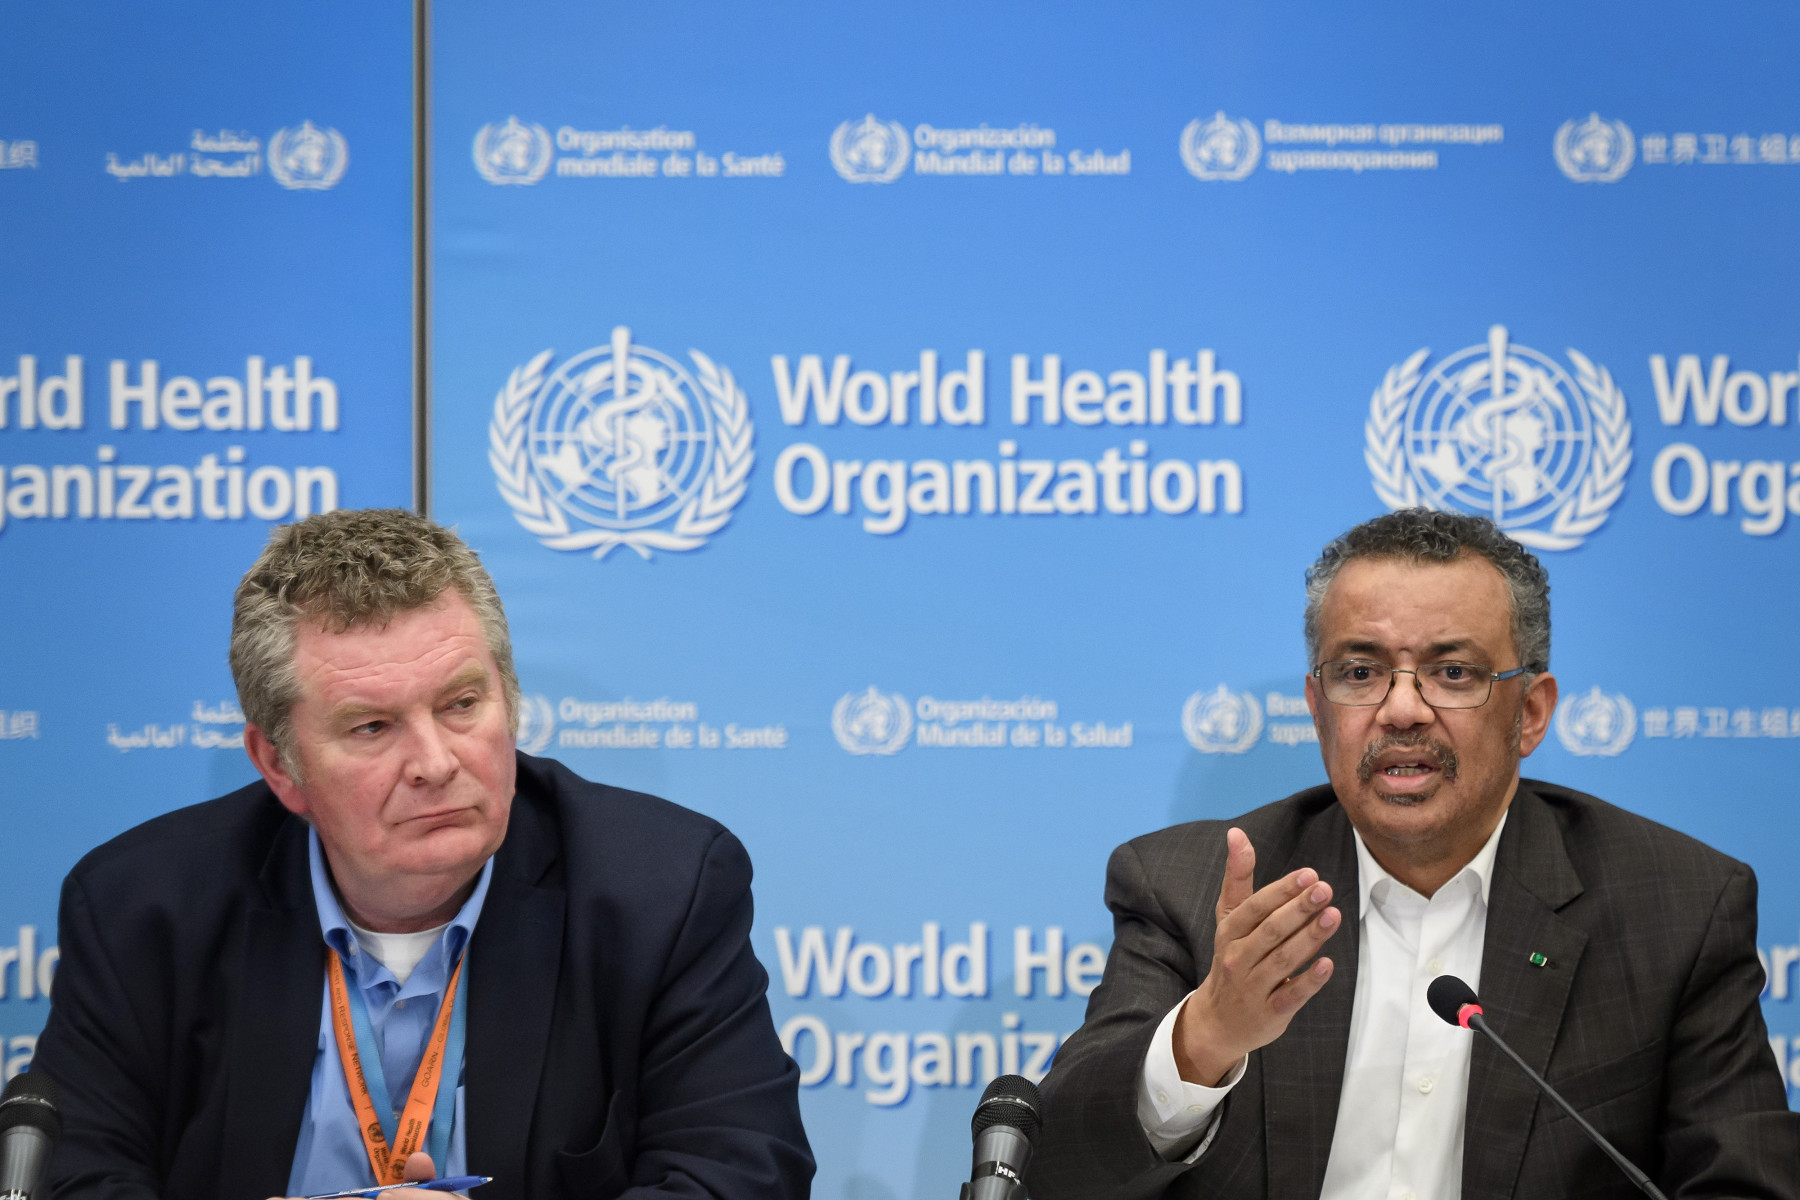 WHO Director-General Tedros Adhanom Ghebreyesus (R), flanked by World Health Organization (WHO) Health Emergencies Programme head Michael Ryan (L), speaks during a press conference following a WHO Emergency committee to discuss whether the Coronavirus, the SARS-like virus, outbreak that began in China constitutes an international health emergency, on January 30, 2020 in Geneva. - The UN health agency declared an international emergency over the deadly coronavirus from China -- a rarely used designation that could lead to improved international co-ordination in tackling the disease. (Photo by Fabrice COFFRINI / AFP) (Photo by FABRICE COFFRINI/AFP via Getty Images)